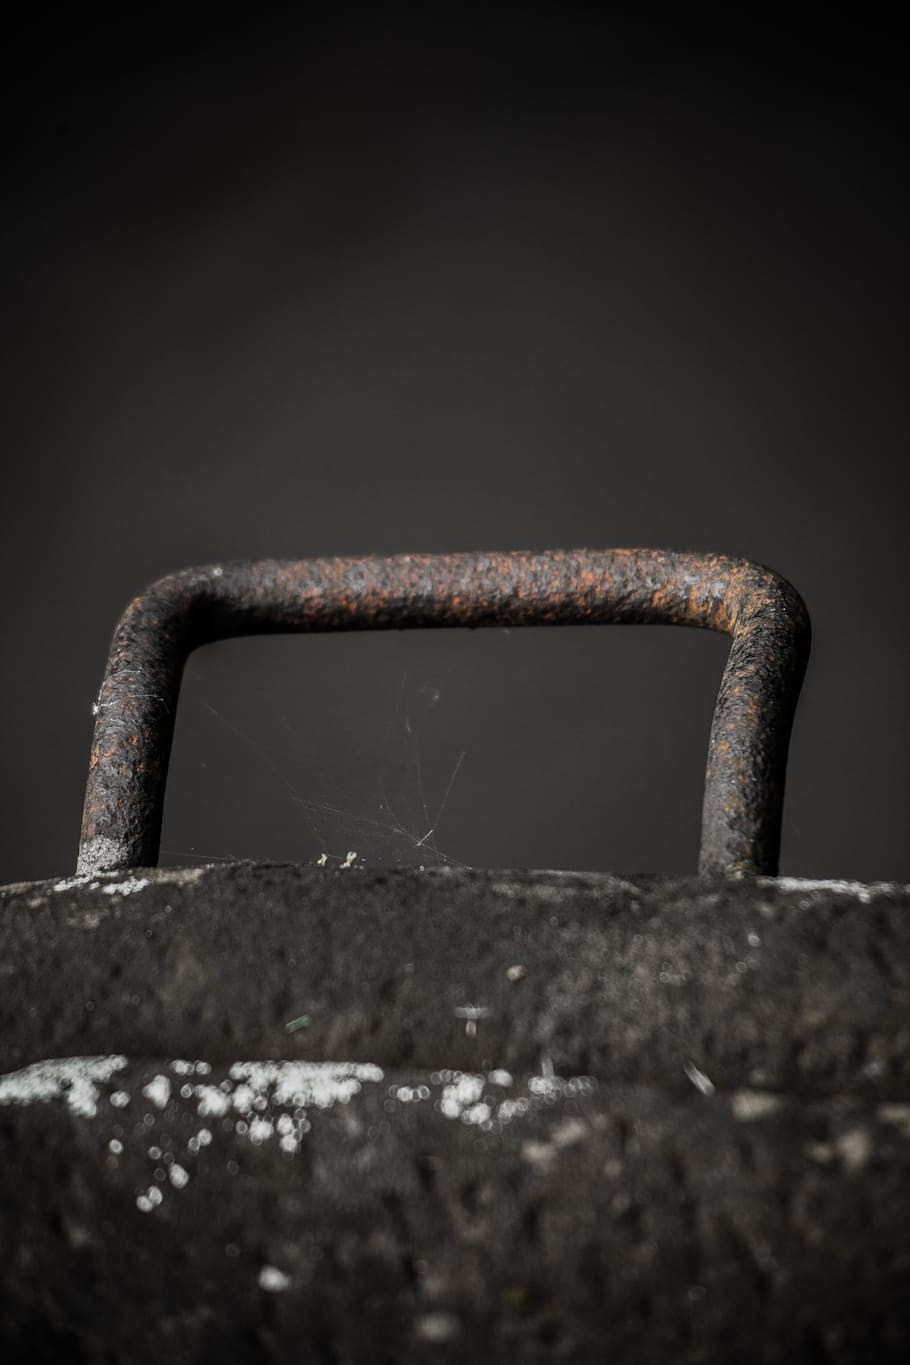 crampon, iron, bent, metal, rusted, corrosion, old, auburn, decomposition, weathered